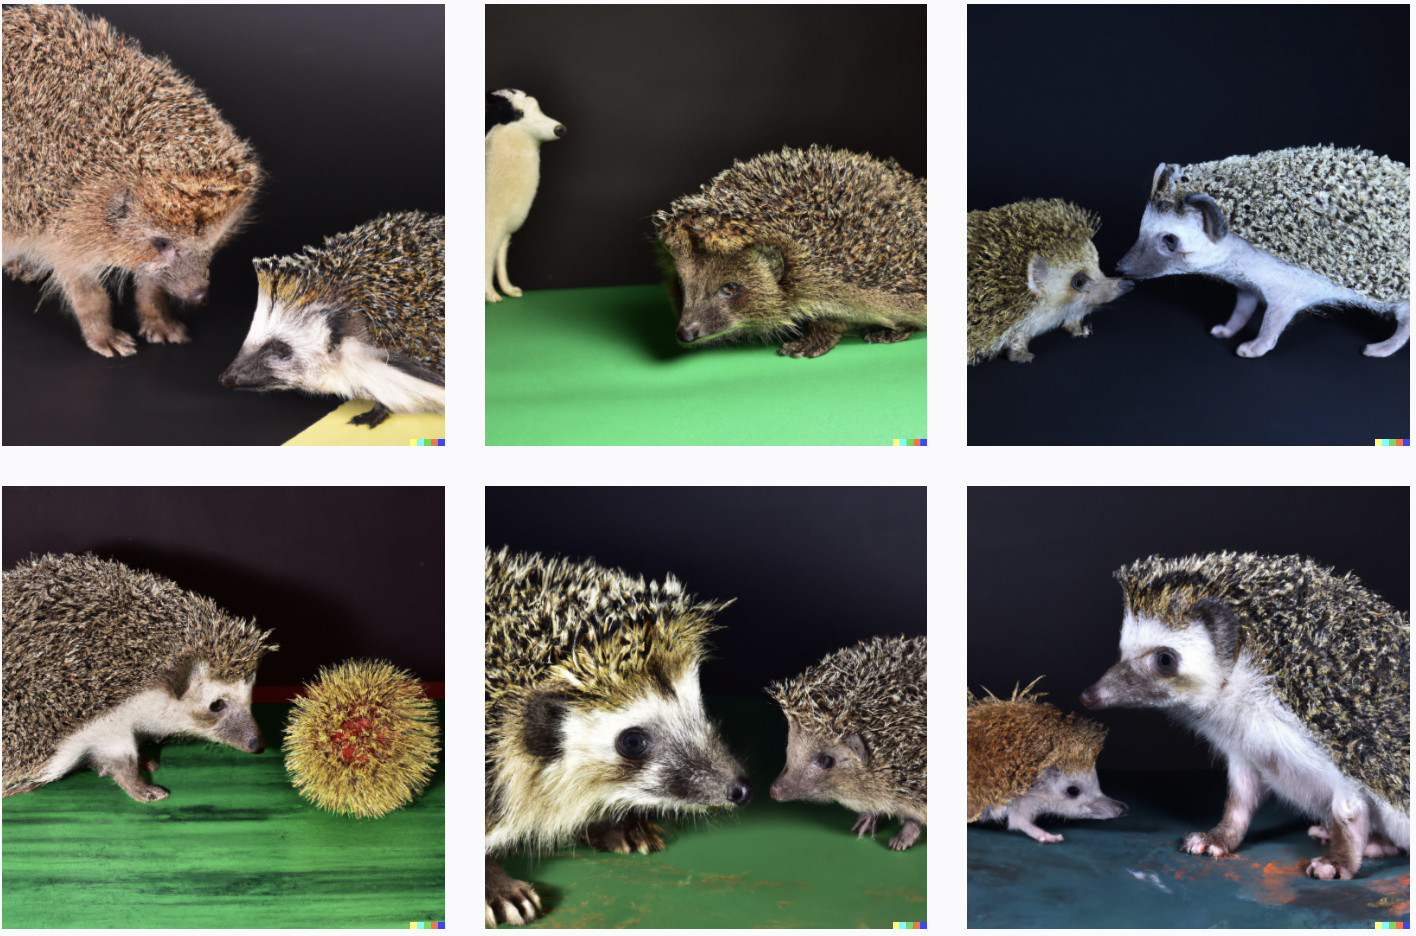 Pairs of animals, mostly two hedgehogs of slightly different sizes. In one generated image there is a hedgehog and a tiny shepherd dog.